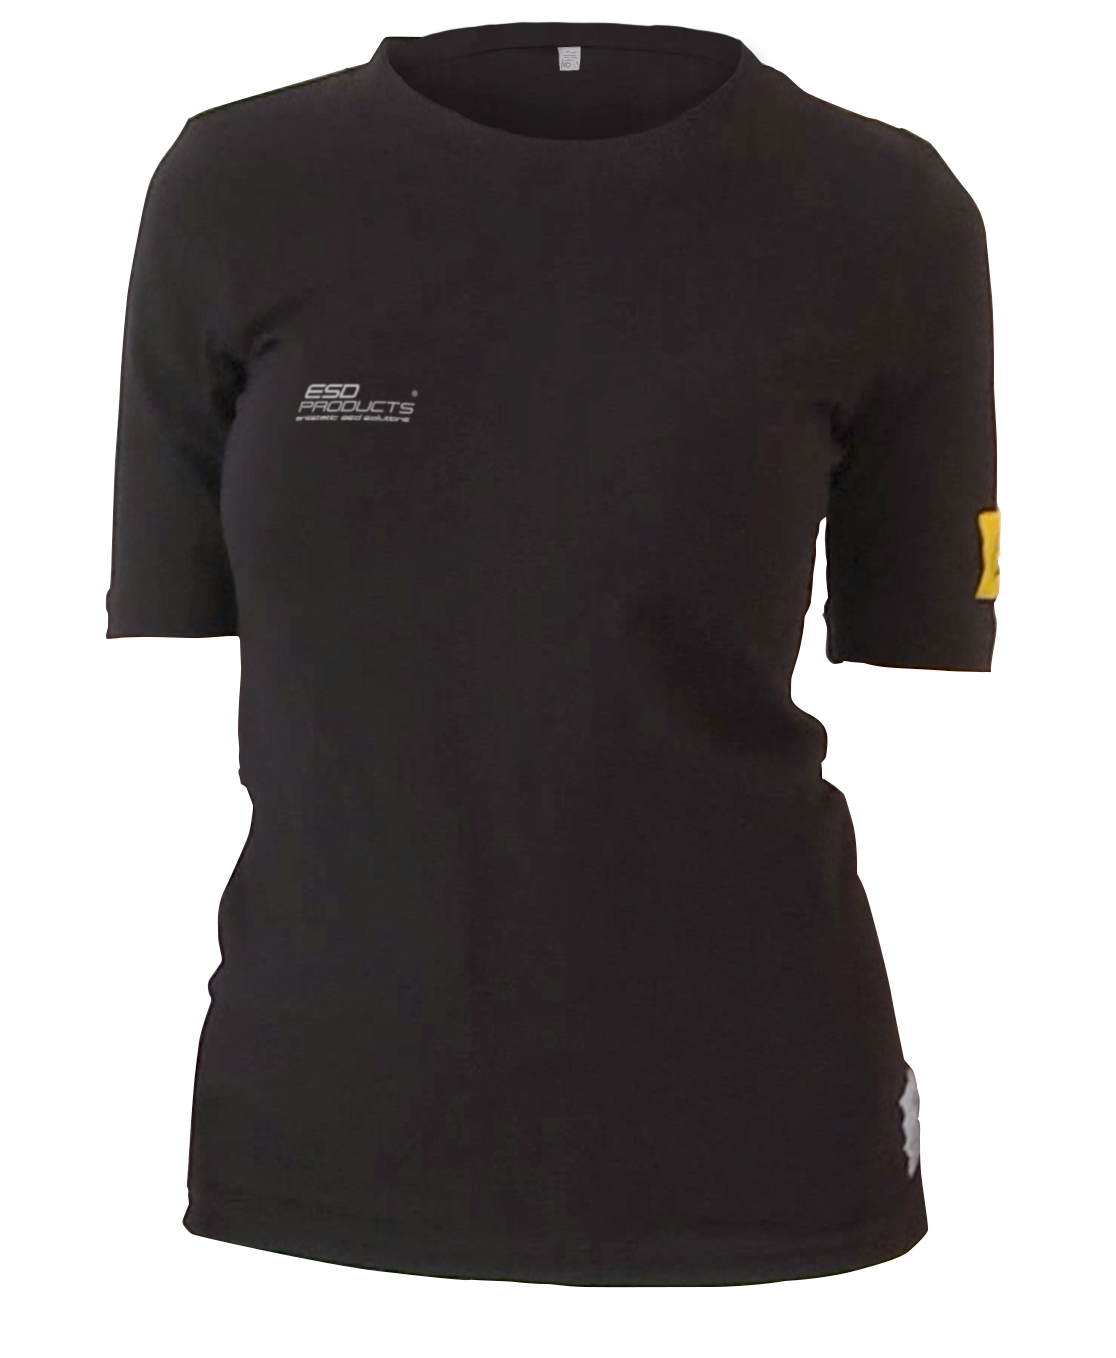 ESD Stretch T-Shirt Woman ATLY Short Sleeve Round Neck ALY20 Fabric Black Unisex 3XL - 473.ATLY-ALY2